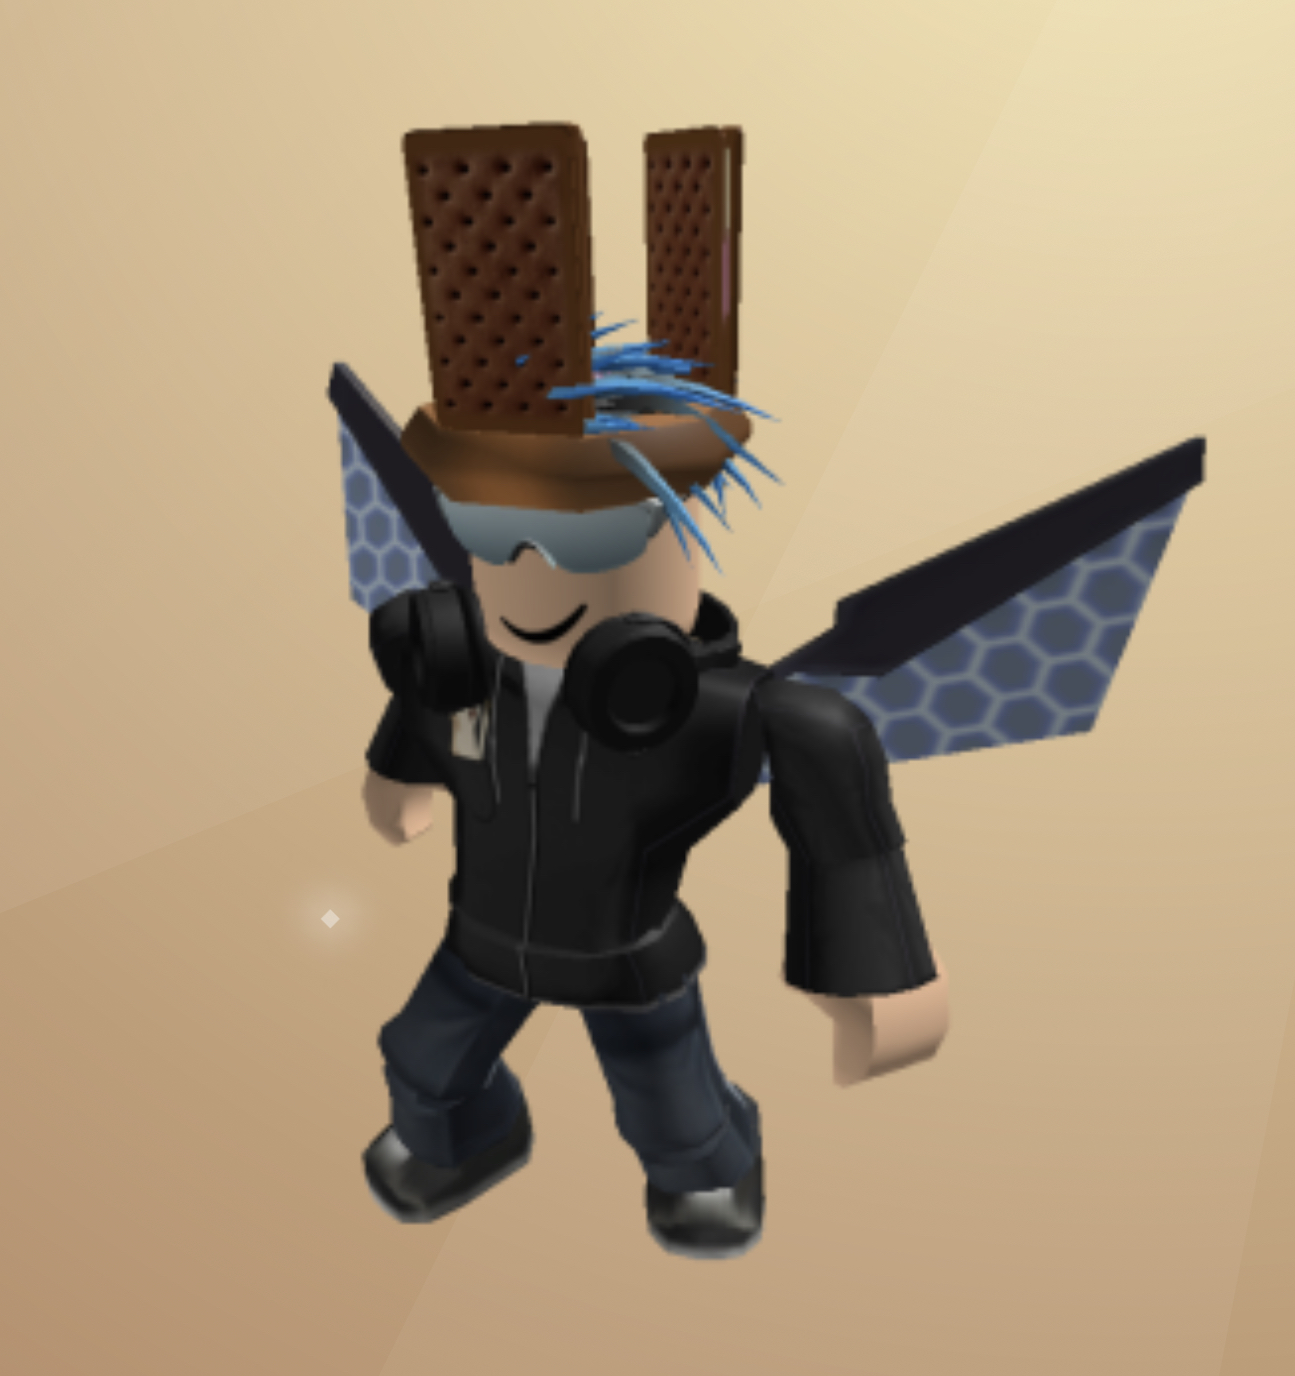 Post your roblox avatar and ill make a guess if you had a father - Off  Topic - Arcane Odyssey